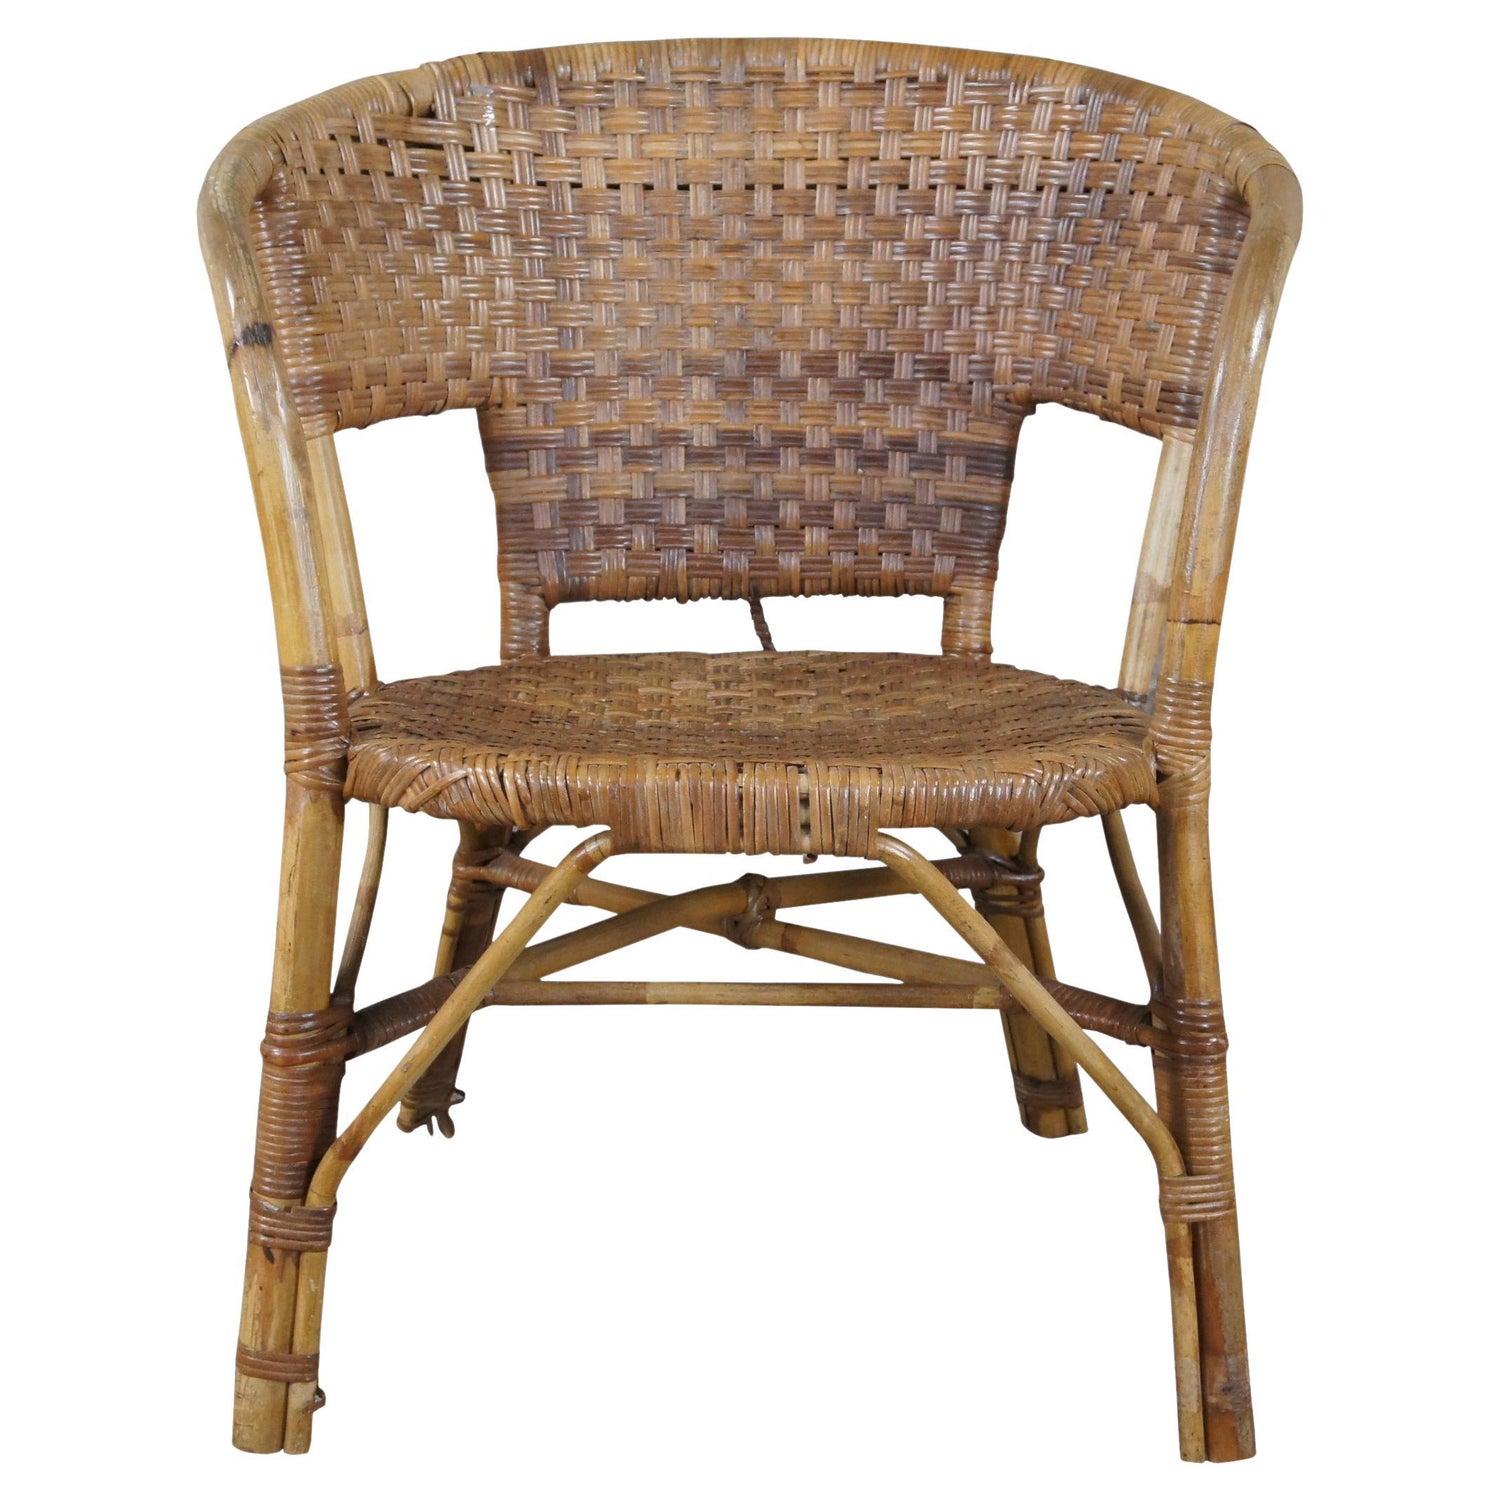 Antique Bentwood Bamboo Woven Wicker Rattan Arm Chair Boho Boheimian For  Sale at 1stDibs